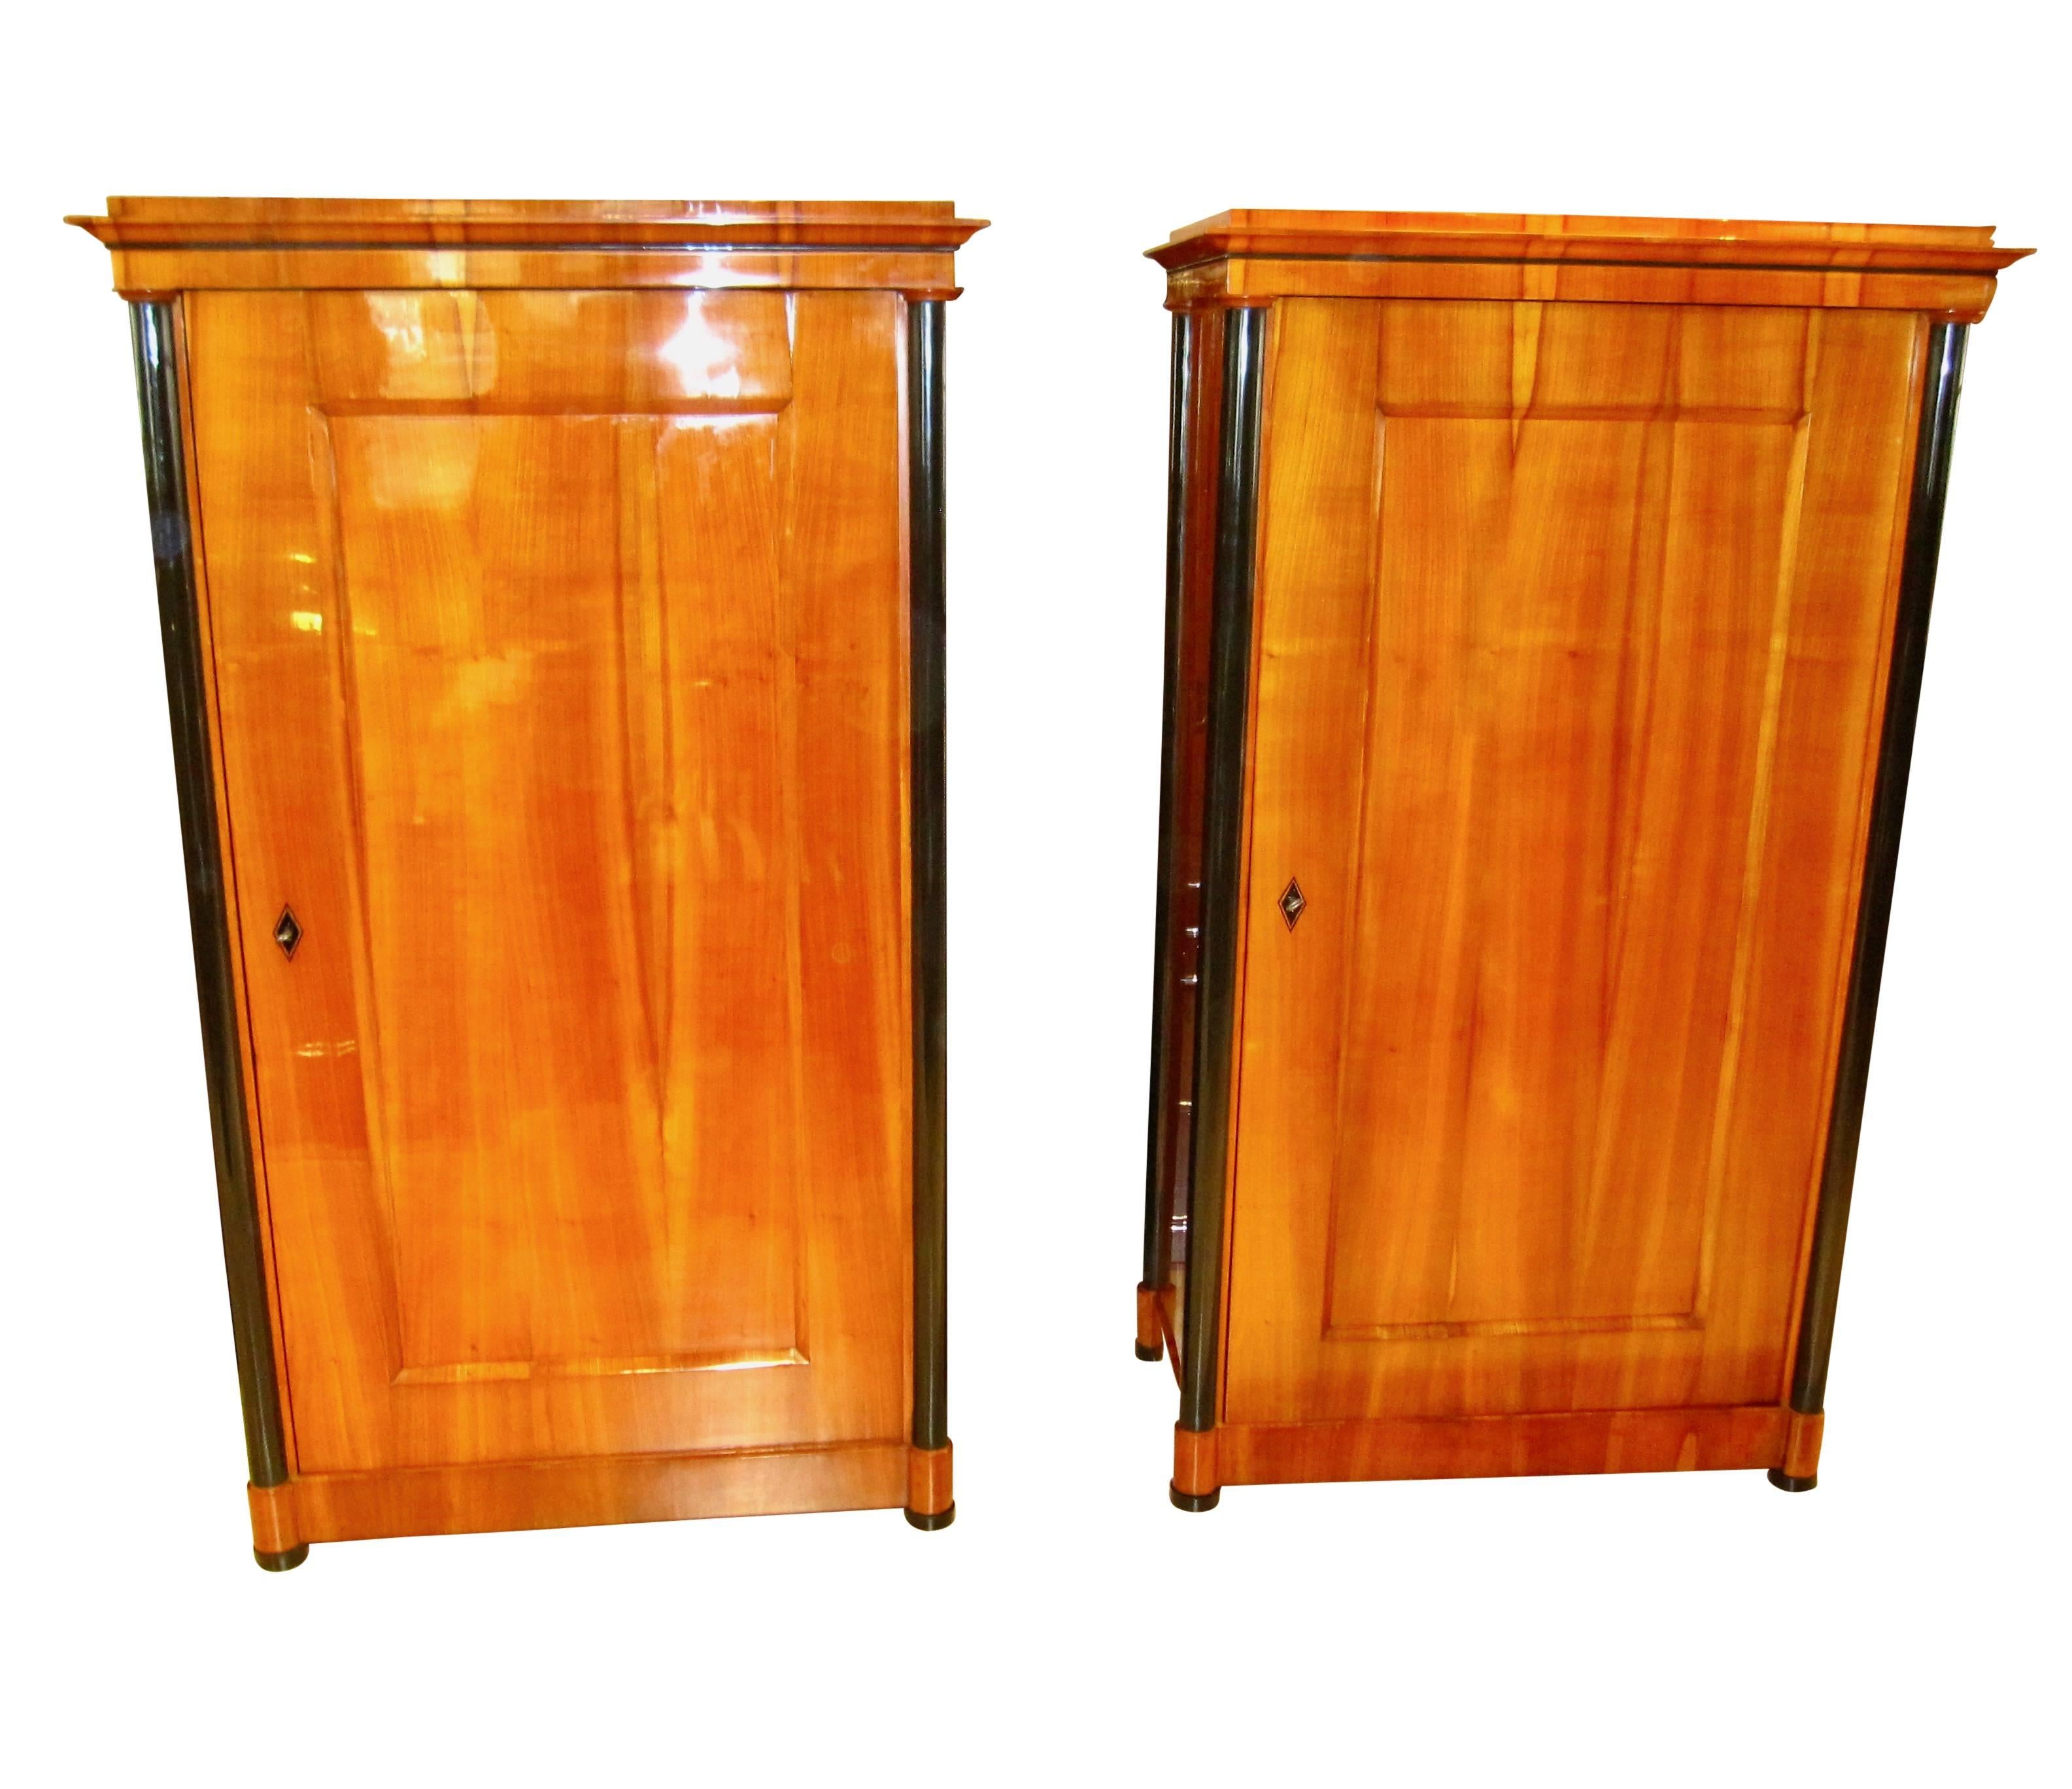 Beautiful and very rare Pair of original Biedermeier armoires/closets from Vienna around 1825. The petite armoires are veneered in a perfect wonderful, bright cherrywood. Each has four ebonized columns, one on every corner. The inside of the doors